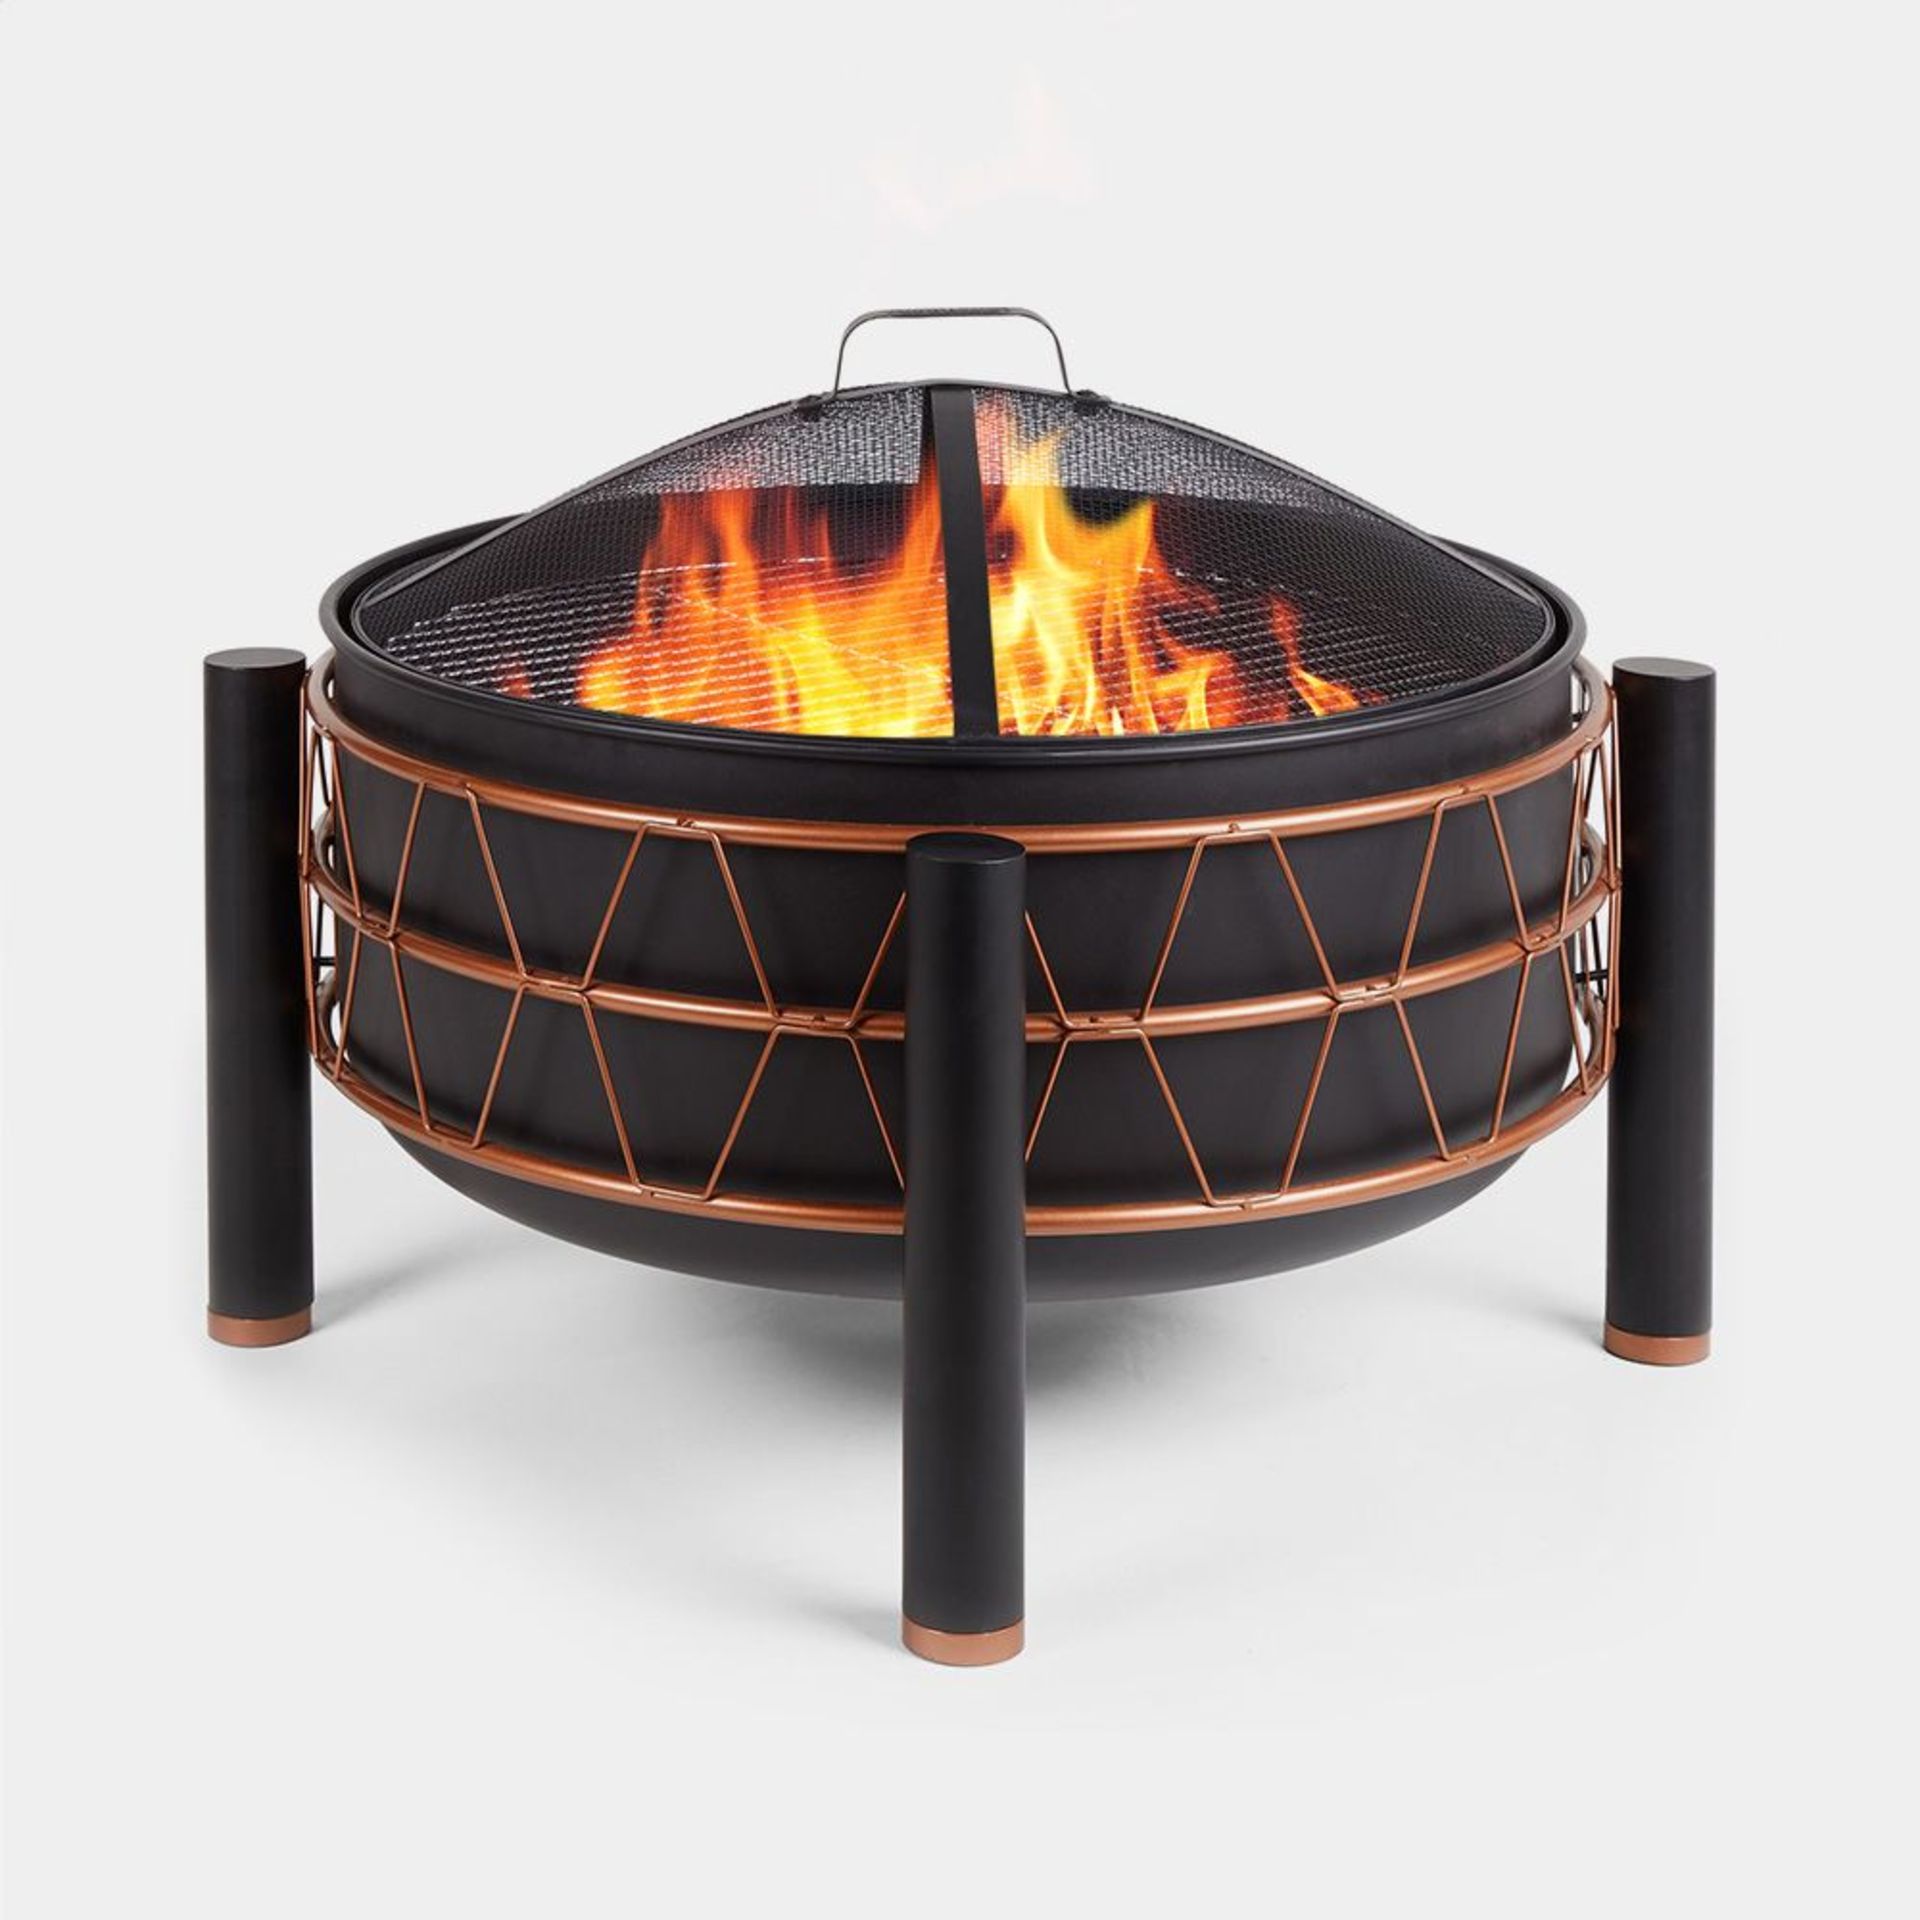 Black & Copper Fire Pit. - BI. Introduce this solid steel fire pit to your garden and start